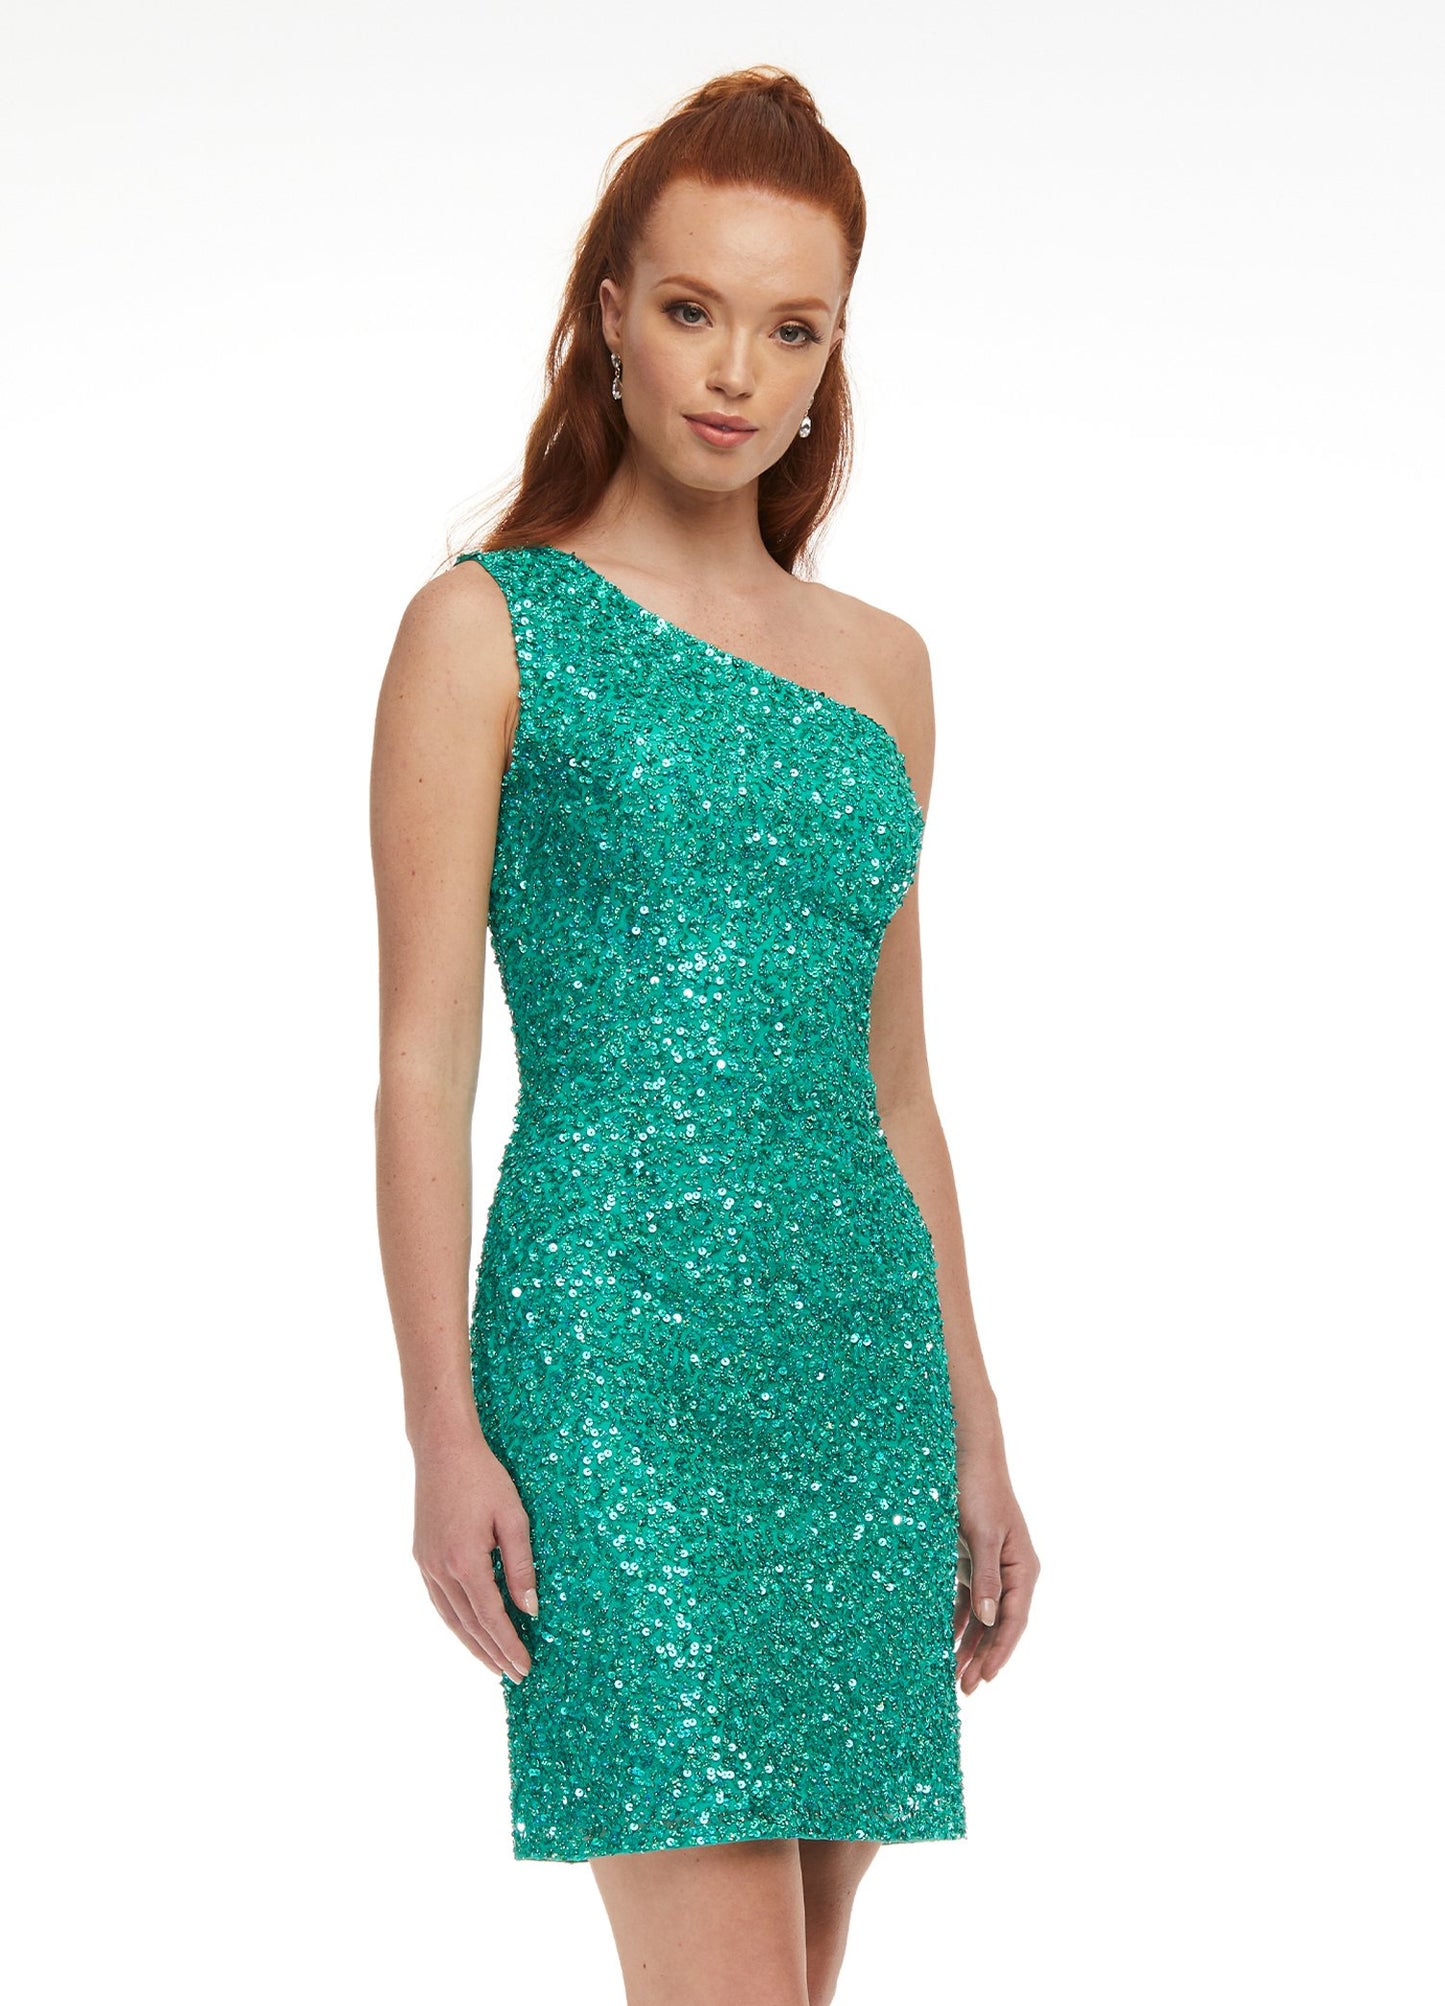 Ashley-Lauren-4469-jade-cocktail-dress-front-sequin-one-shoulder-strap-asymmetrical-lace-up-back-cutout-fitted